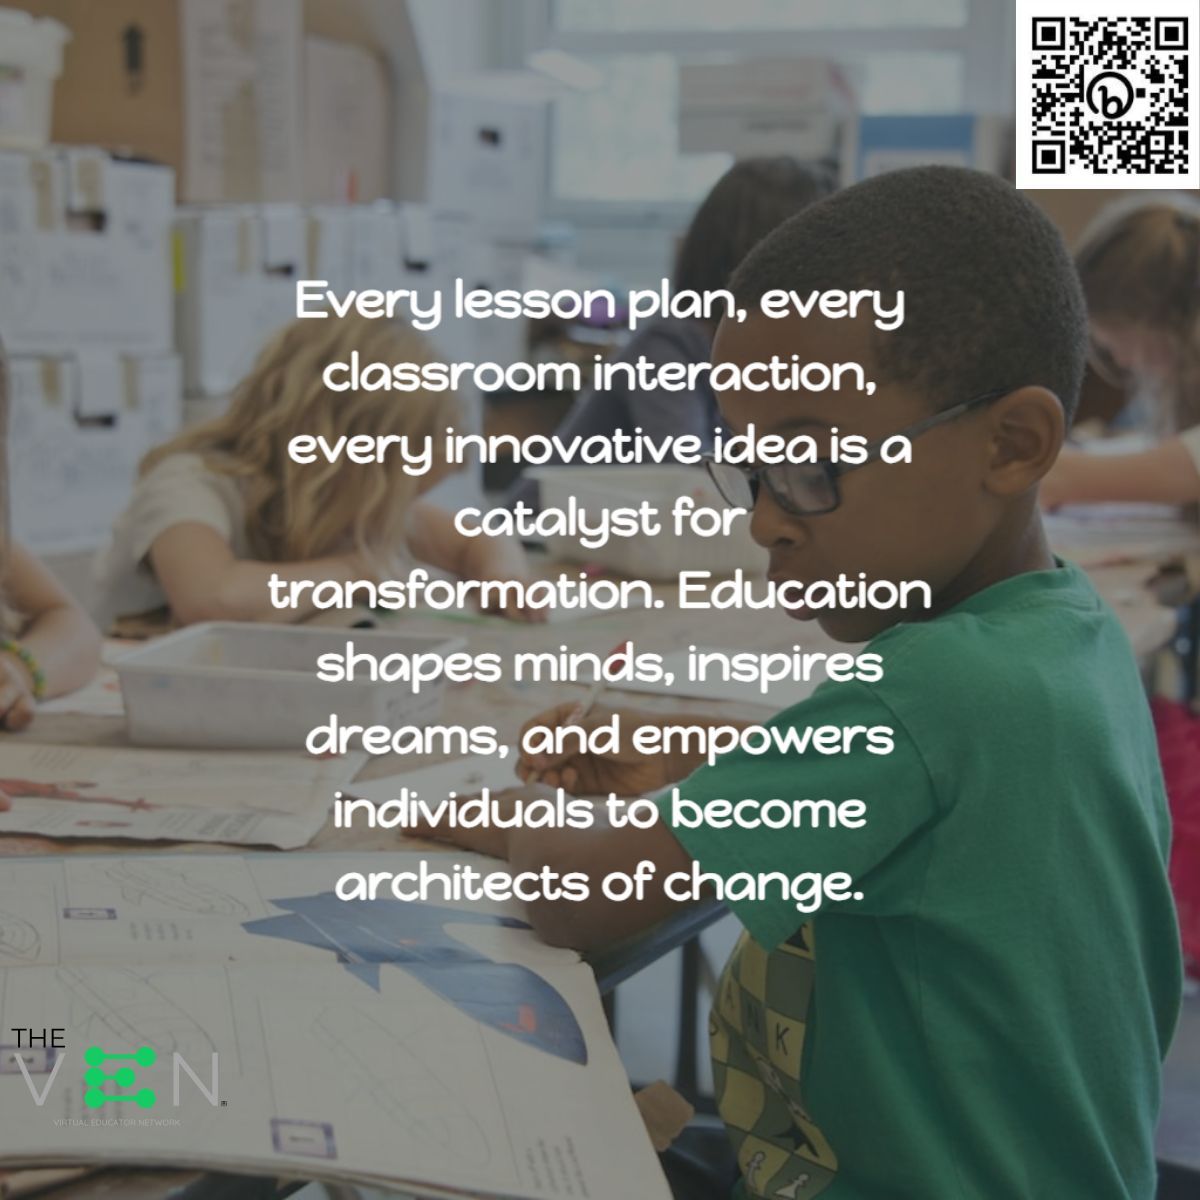 🪄 Let's embrace our roles not just as educators but as agents of change. Together, we're not just educating students; we're shaping future leaders, thinkers, and doers who will, in turn, shape the world. Shout out/tag a fellow #agentofchange!💚 #TheVEN #TeacherTwitter